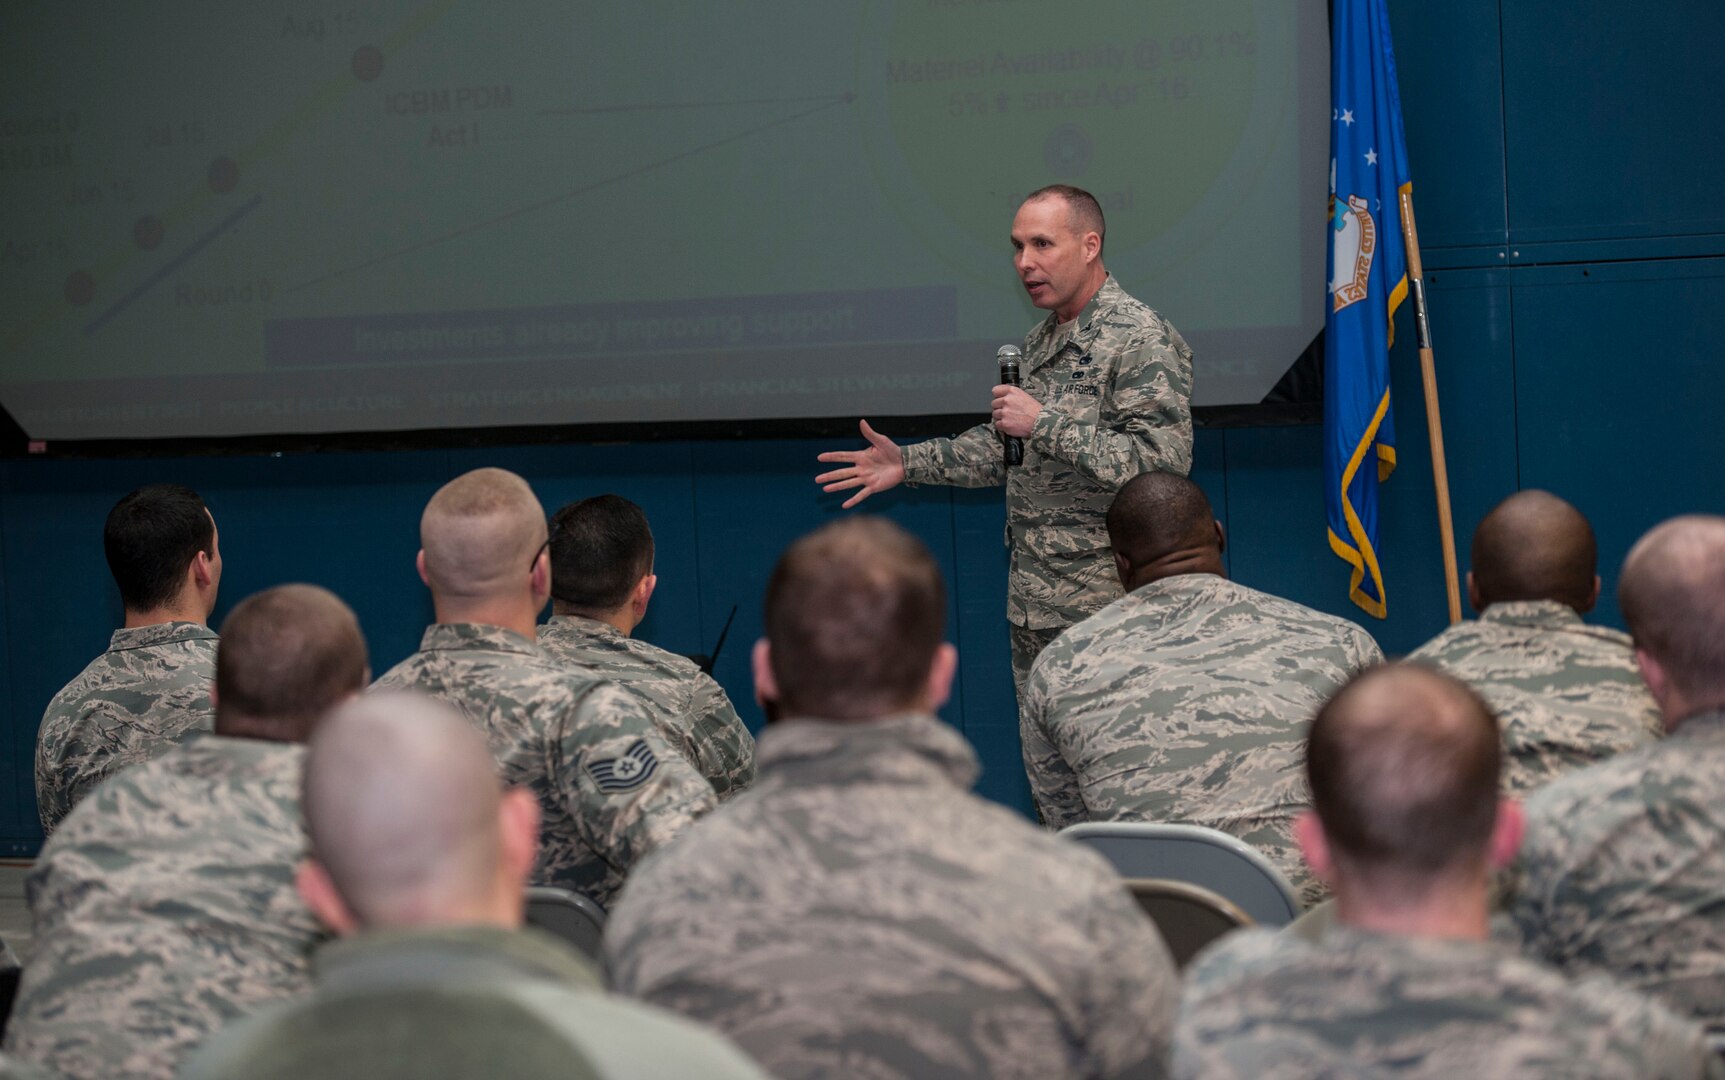 Air Force Col. John Waggoner, Customer Operations director, DLA Aviation, talks to members of the 91st Maintenance Group at Minot Air Force Base, North Dakota.  He discussed how to improve Minuteman III sustainment and the Air Force Global Strike Command’s role in sustainment success.